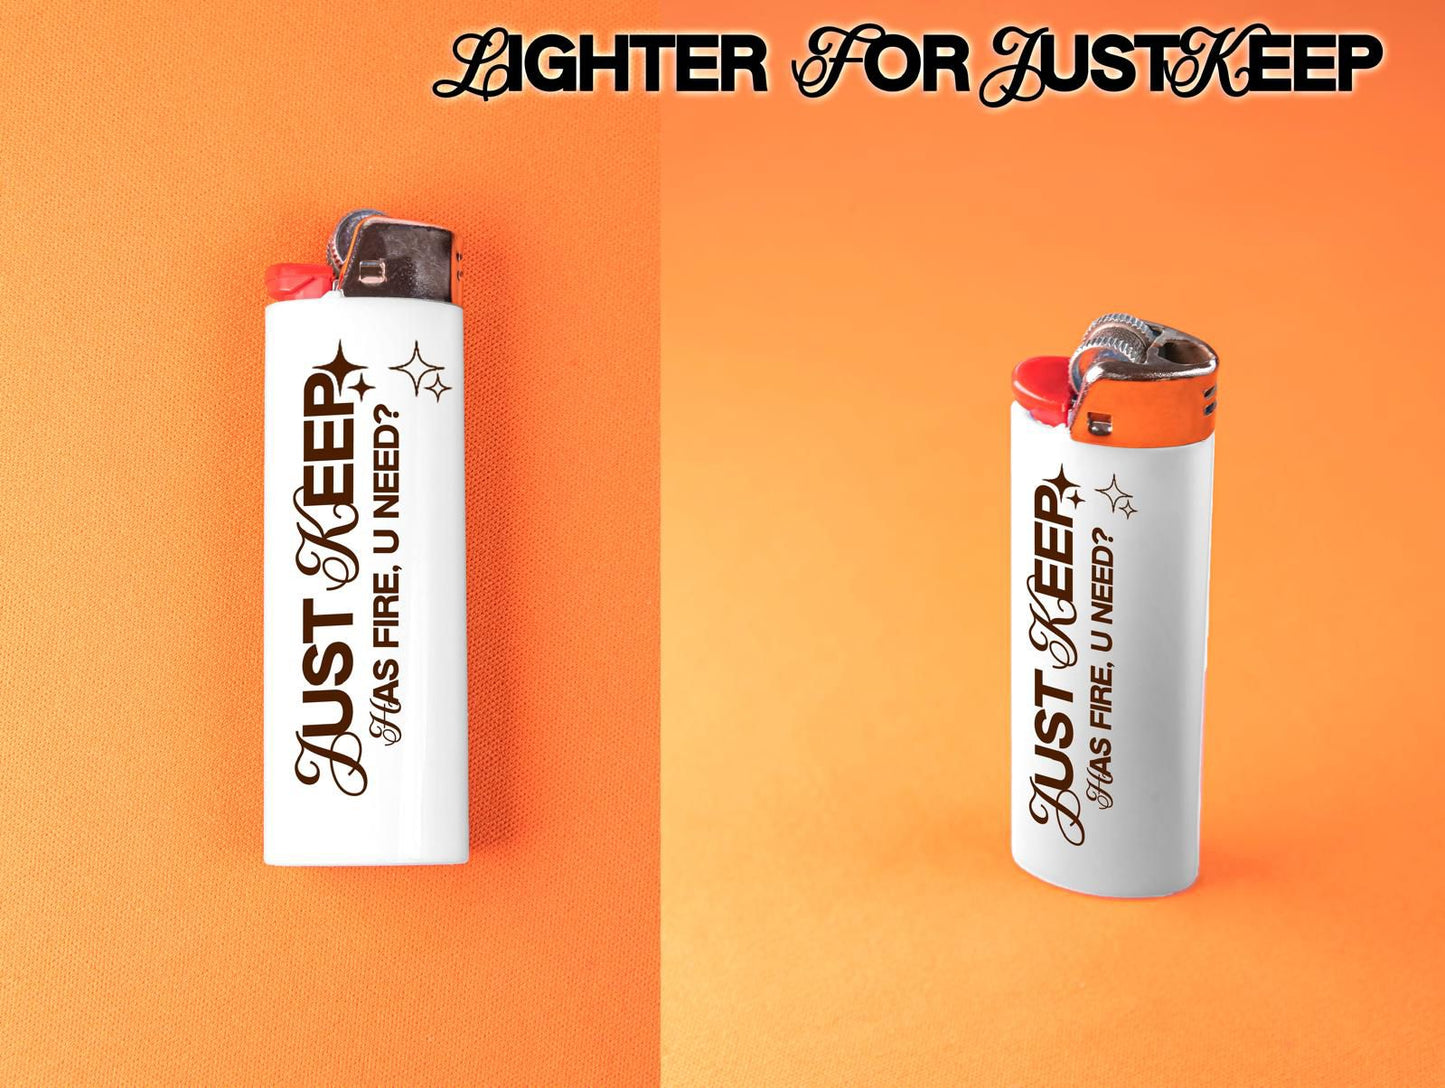 Lighter for JustKeep